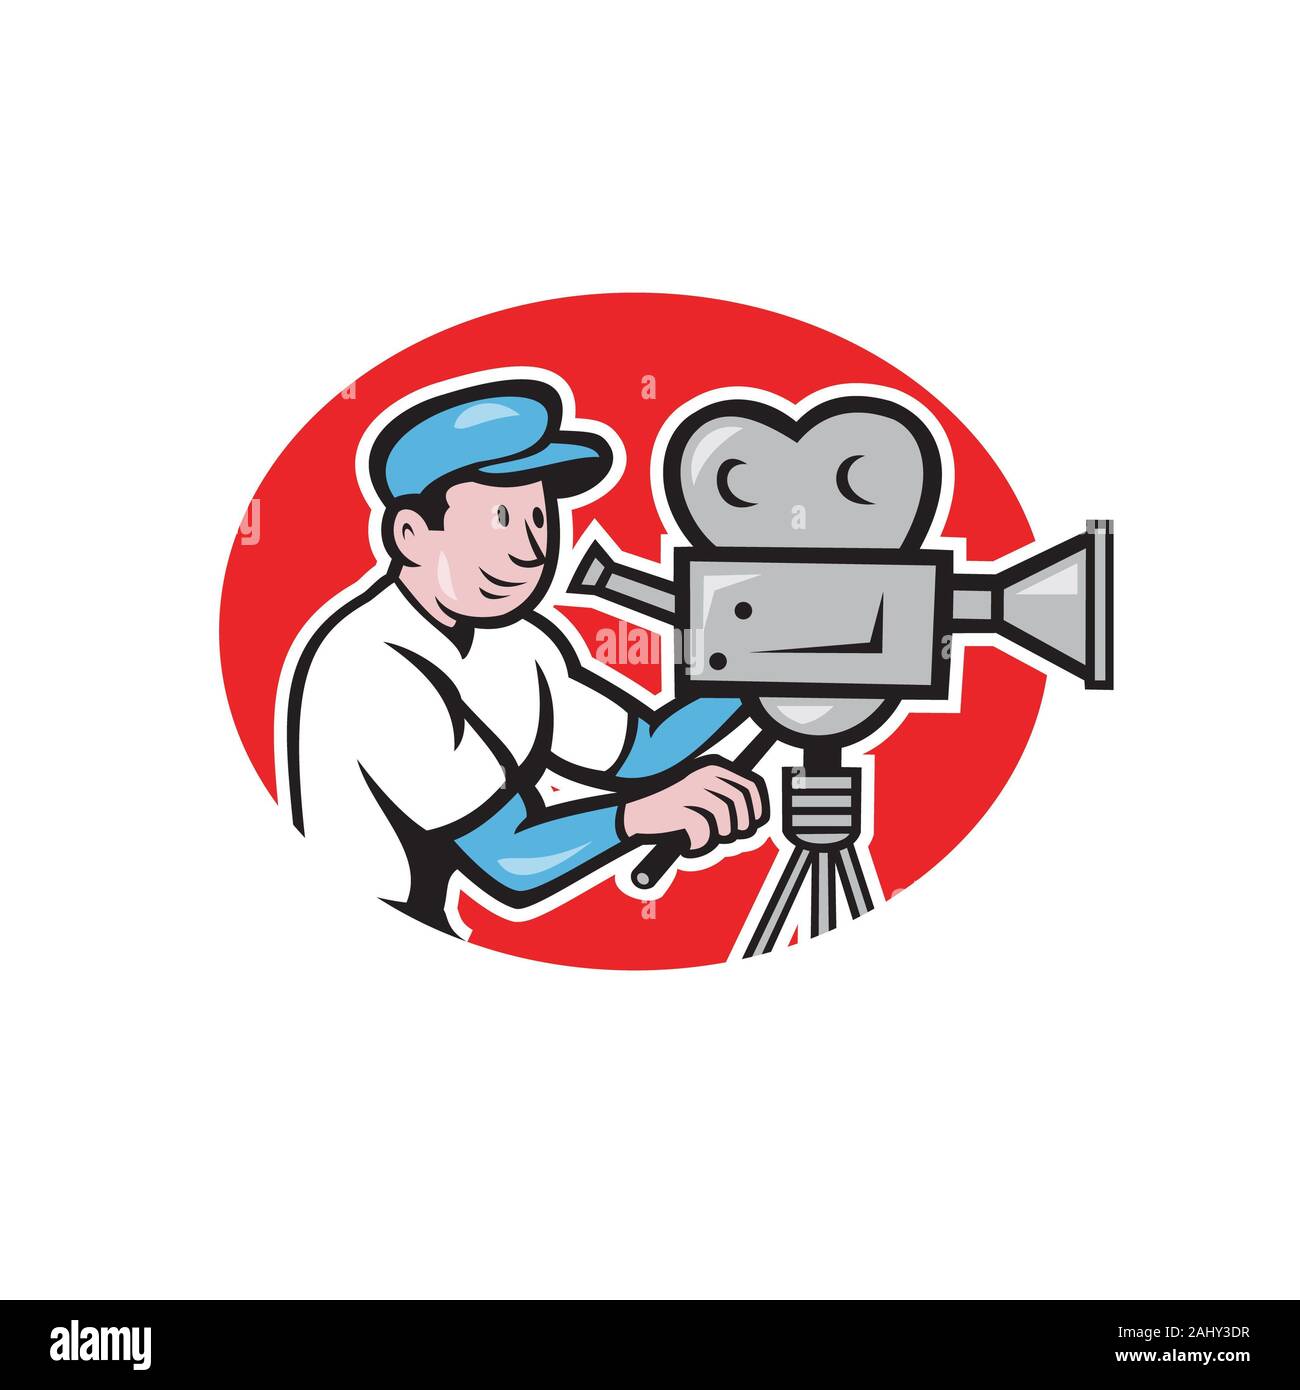 Illustration of a cameraman movie director with vintage movie film camera set viewed from side done in cartoon style. Stock Photo